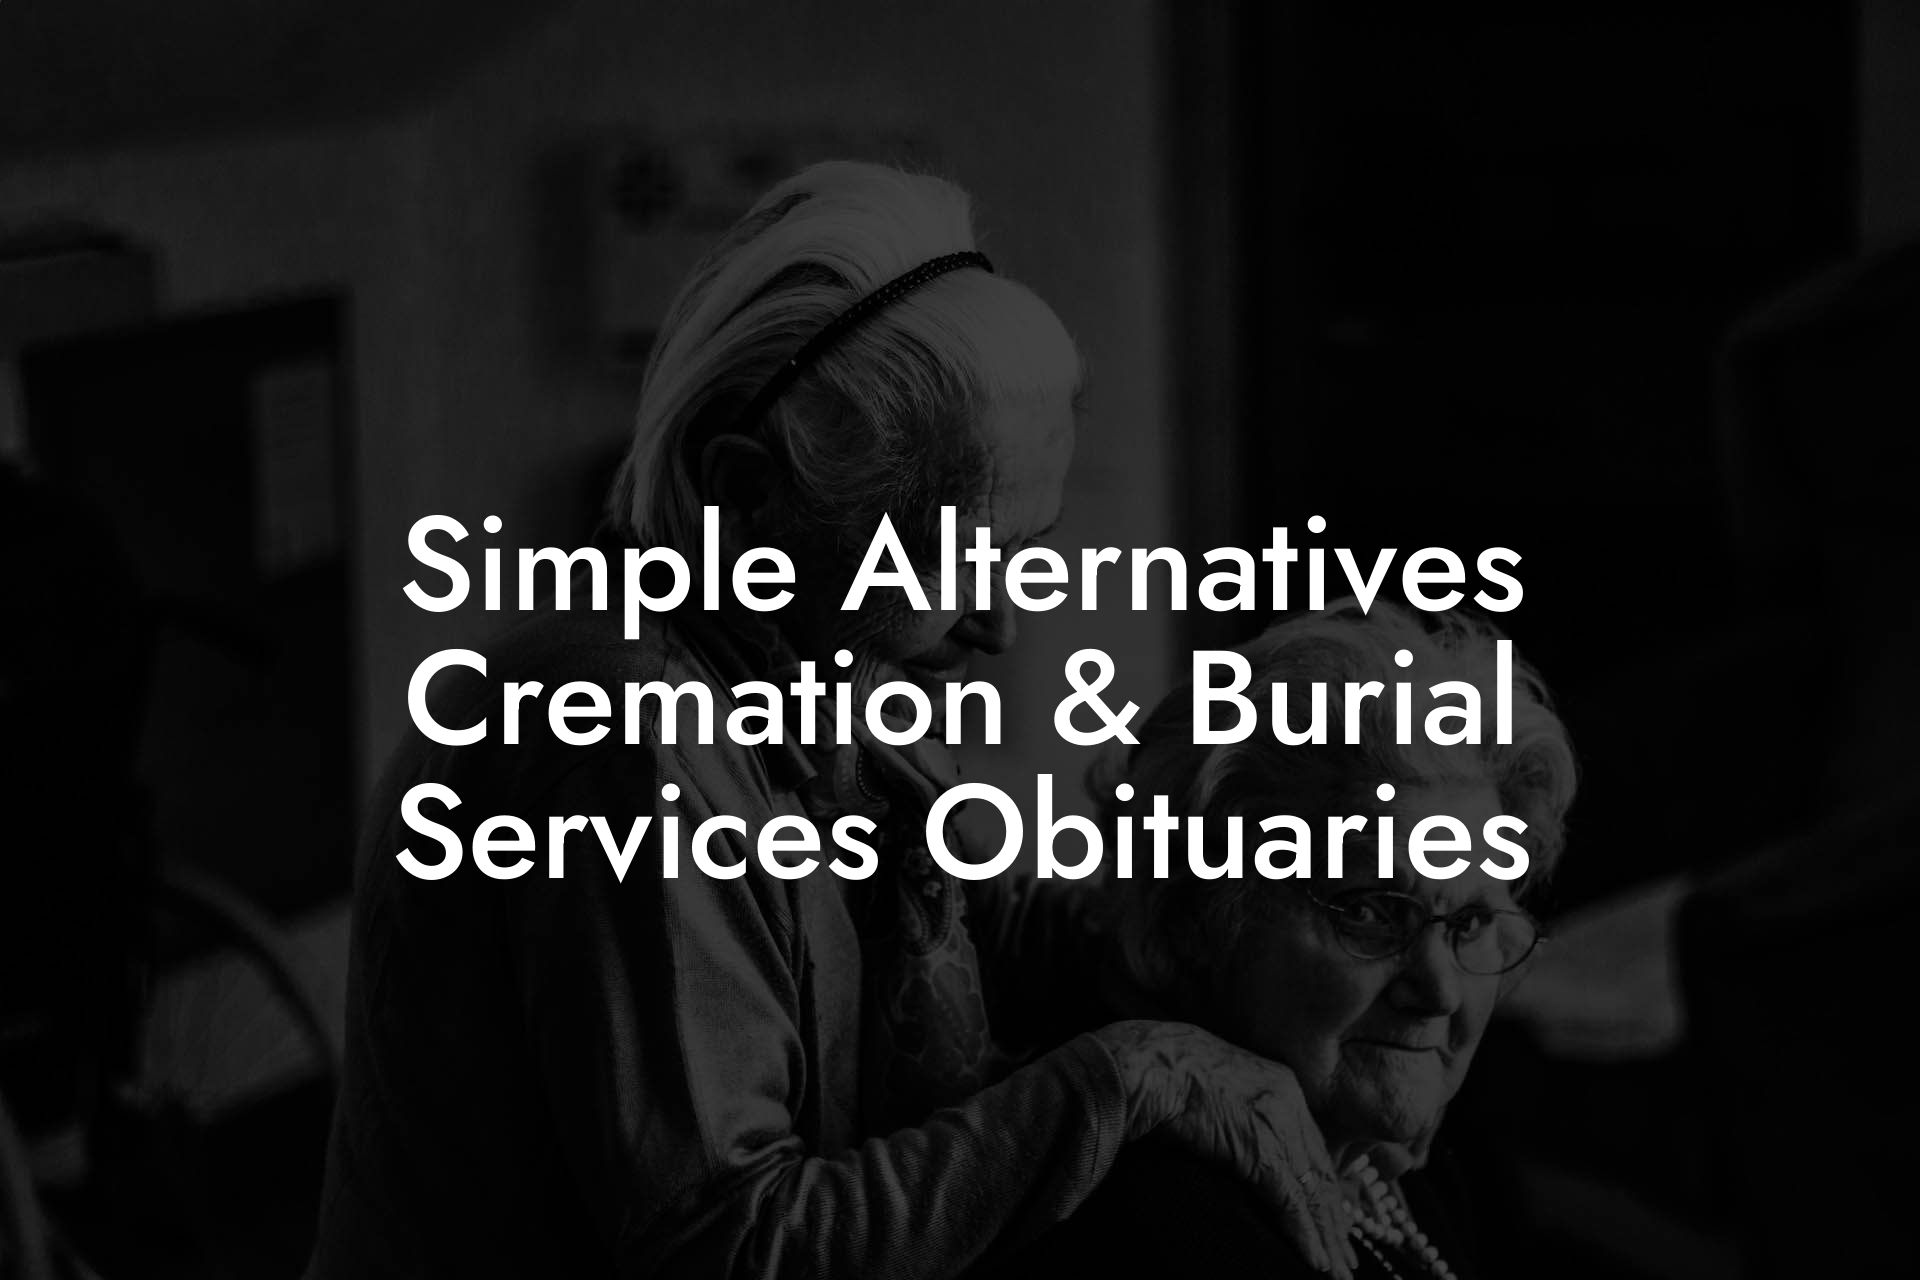 Simple Alternatives Cremation & Burial Services Obituaries